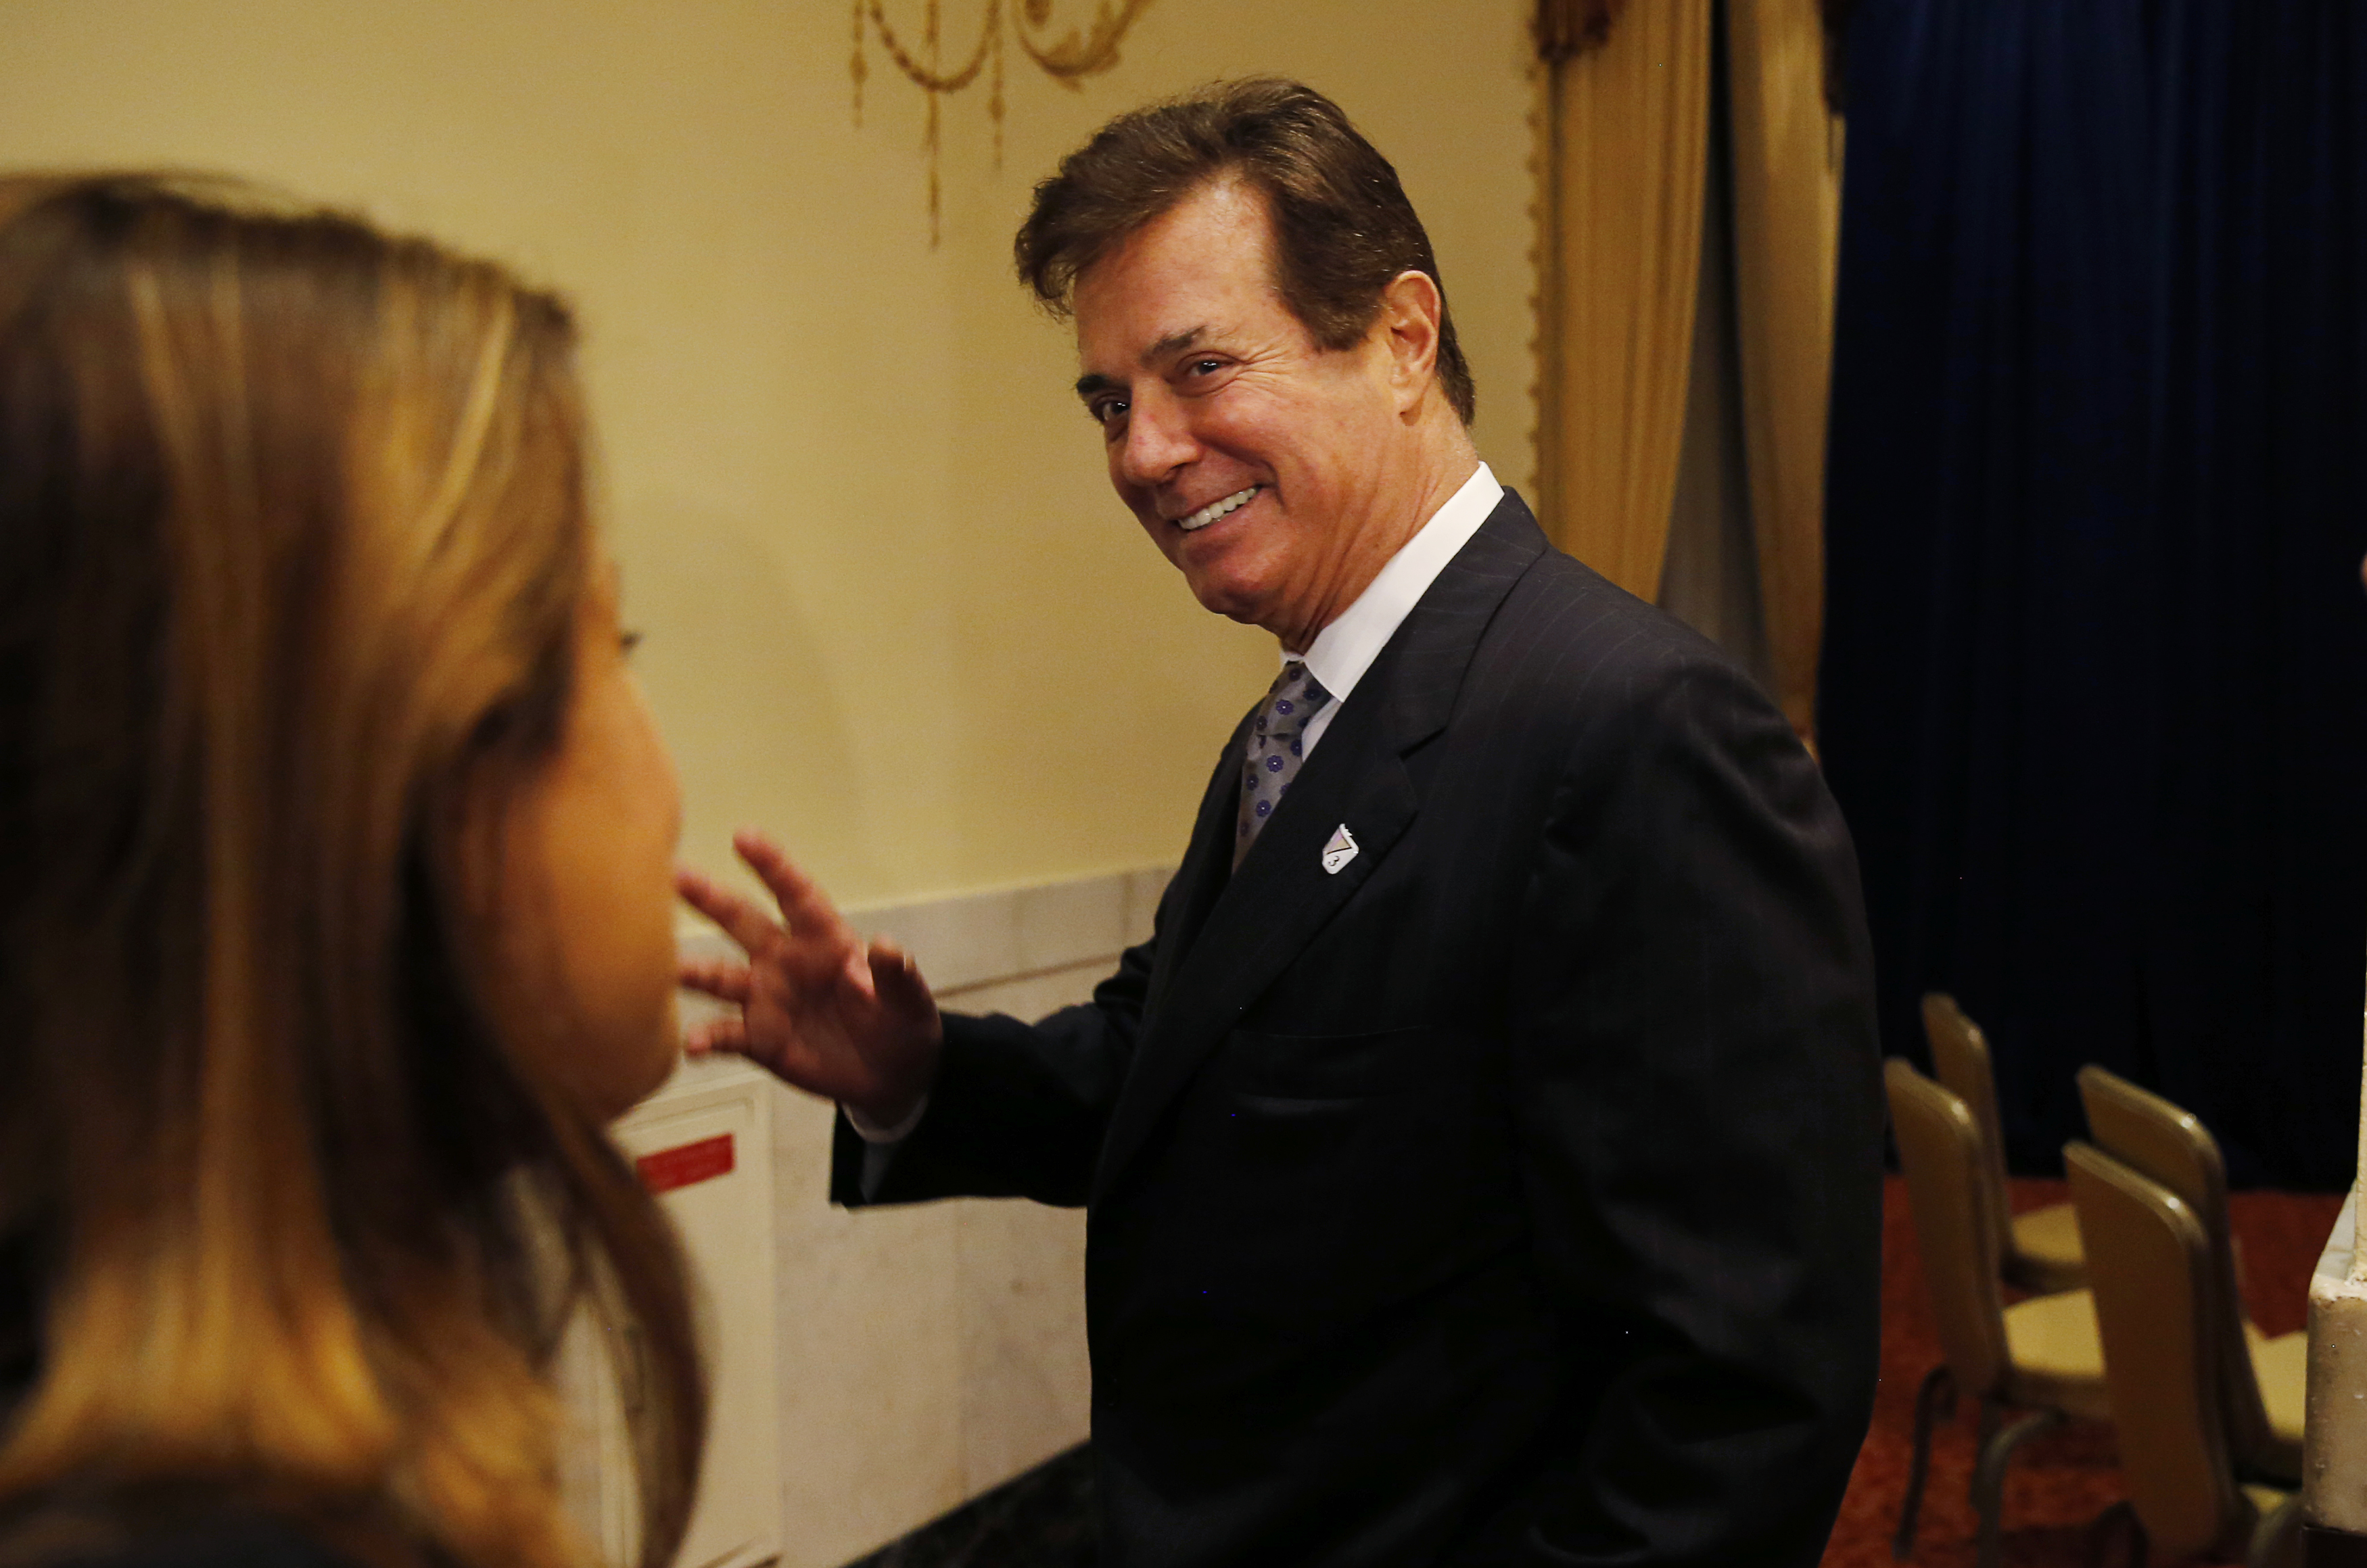 Paul Manafort, senior aide to Republican U.S. presidential candidate Donald Trump, waves goodbye to reporters after Trump delivered a foreign policy speech at the Mayflower Hotel in Washington, D.C., on April 27, 2016 (Jim Bourg—Reuters)